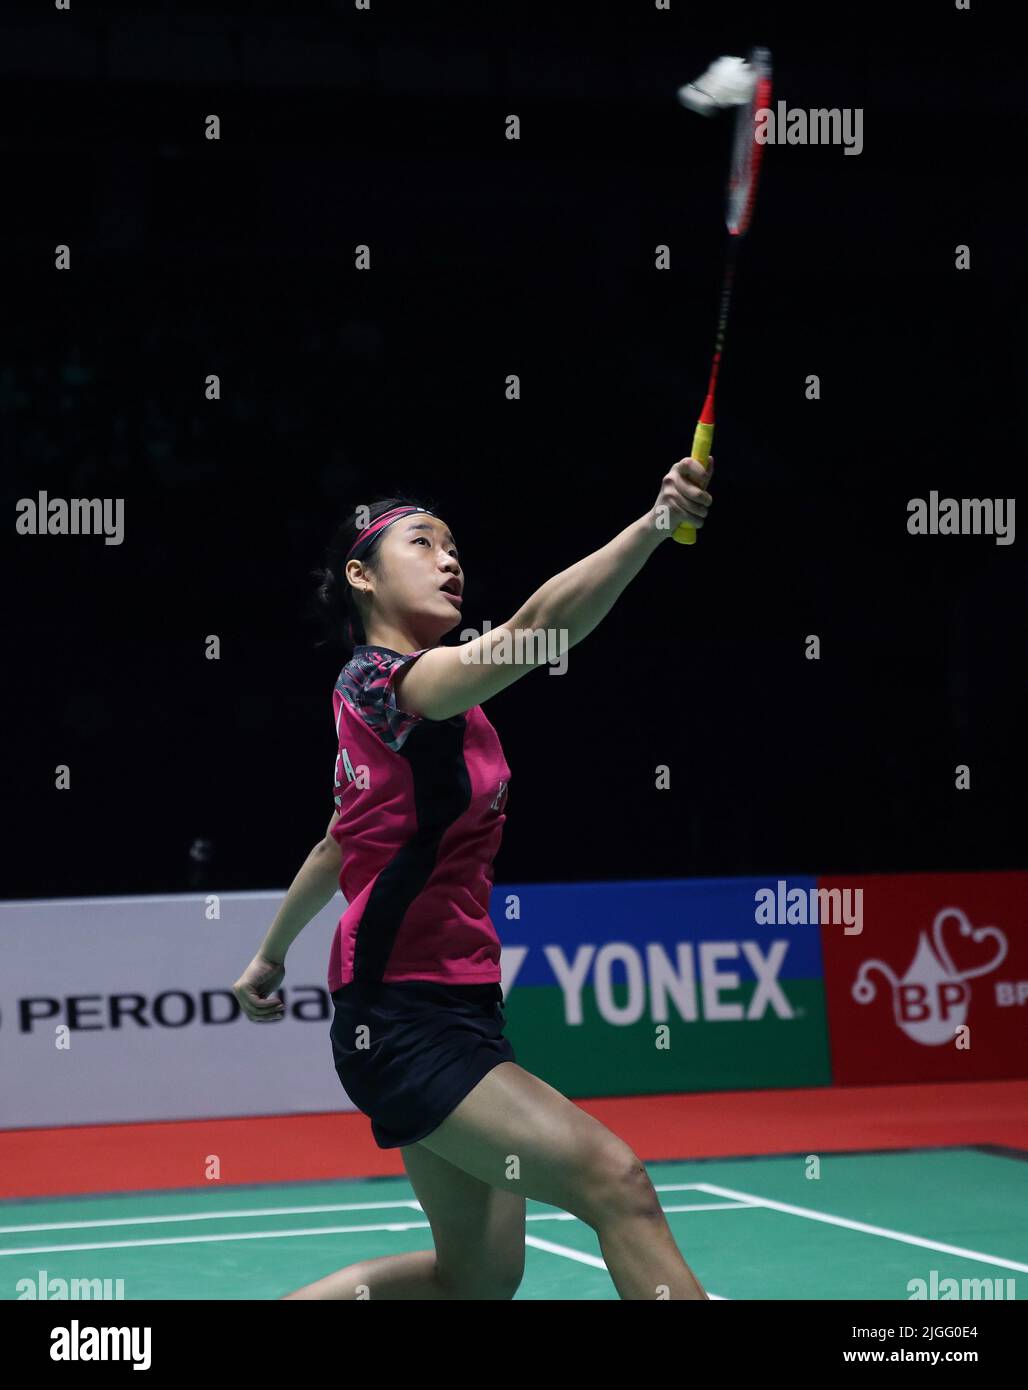 Kuala Lumpur Malaysia 10th July 2022 An Se Young Of Korea Competes Against Chen Yu Fei Of China During The Women S Single Final Match Of The Perodua Malaysia Masters 2022 At Axiata